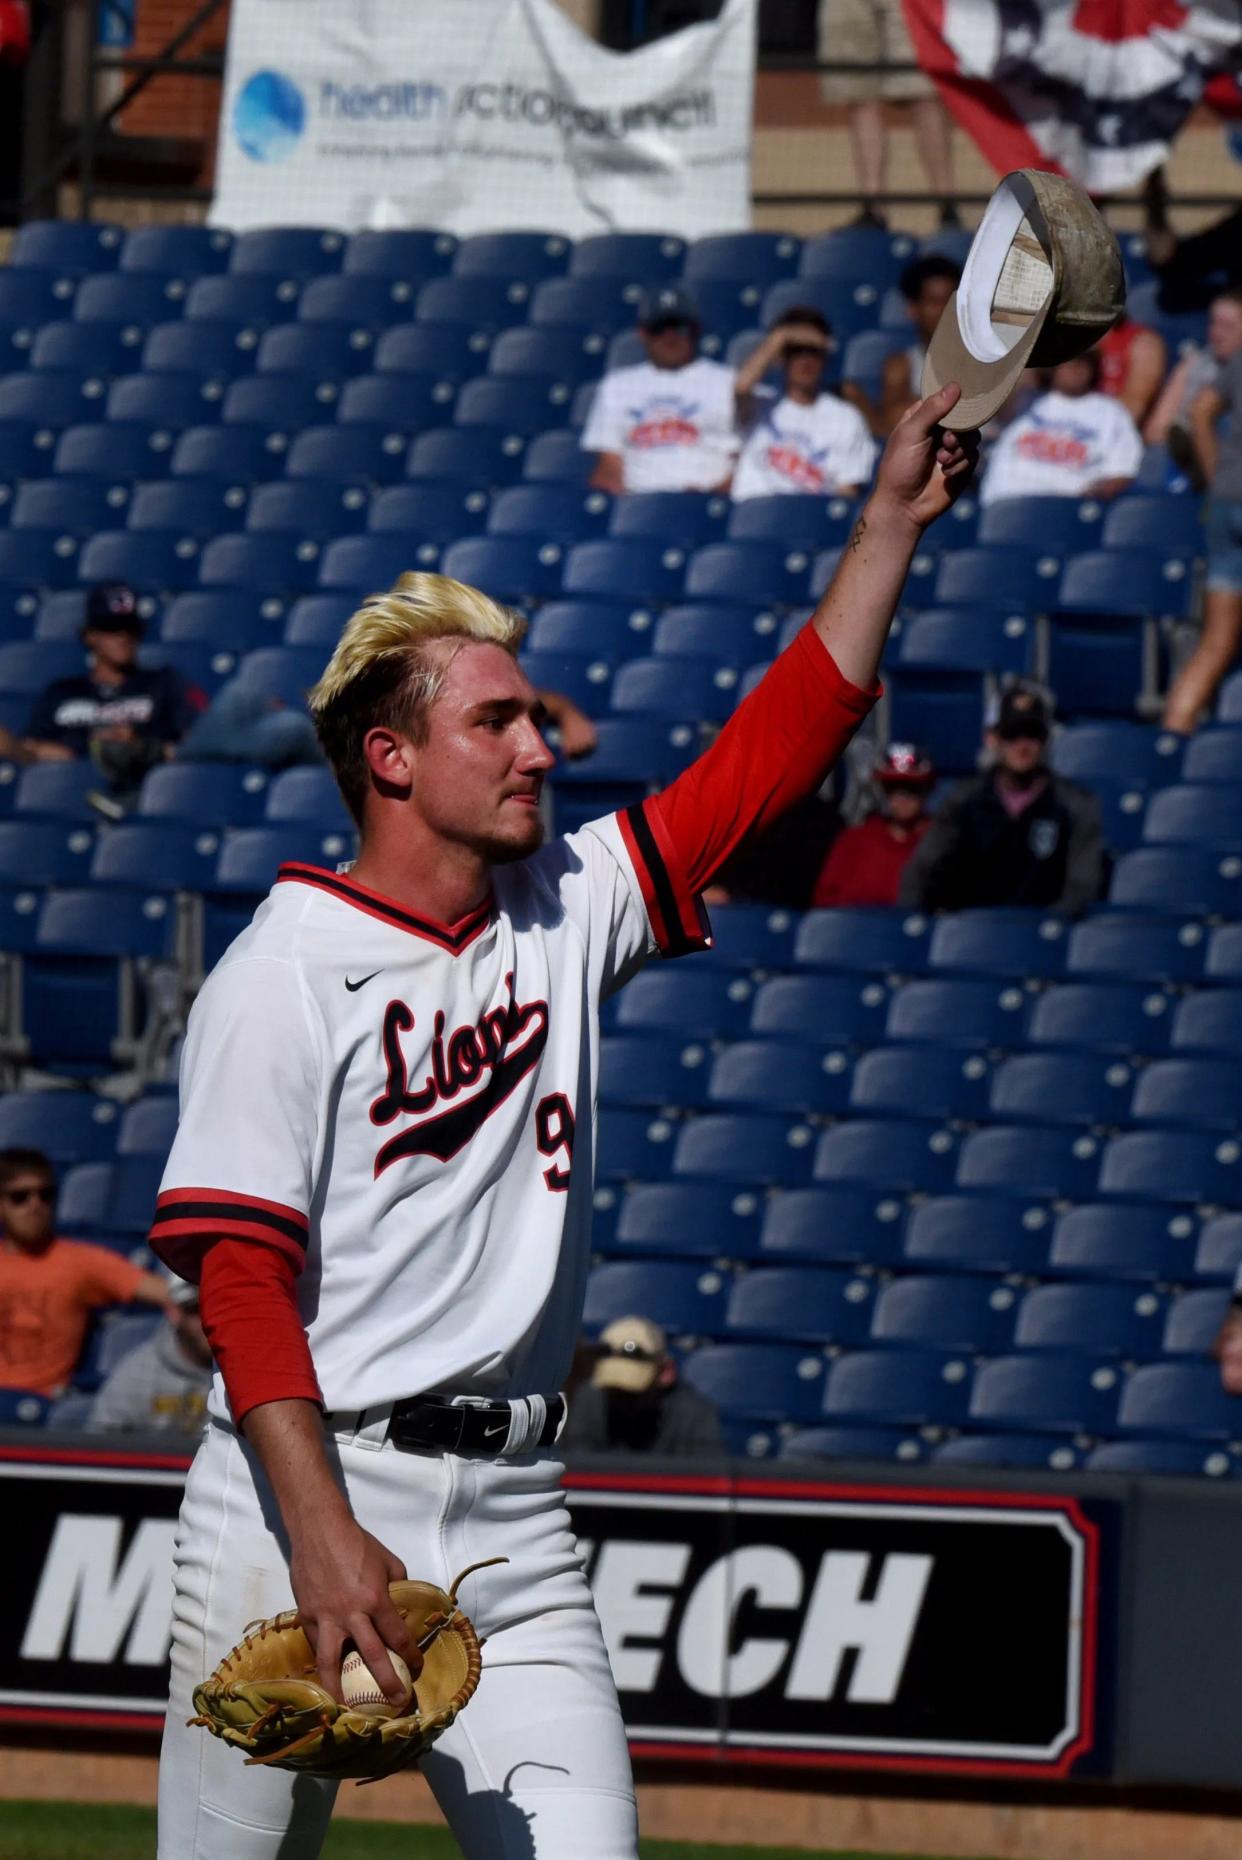 Liberty Union senior pitcher Jacob Miller waves to fans as he leaves the mound after pitching against Waynedale in a Division III state semifinal on Thursday, June 9, 2022, at Canal Park in Akron. The Lions lost 4-3.